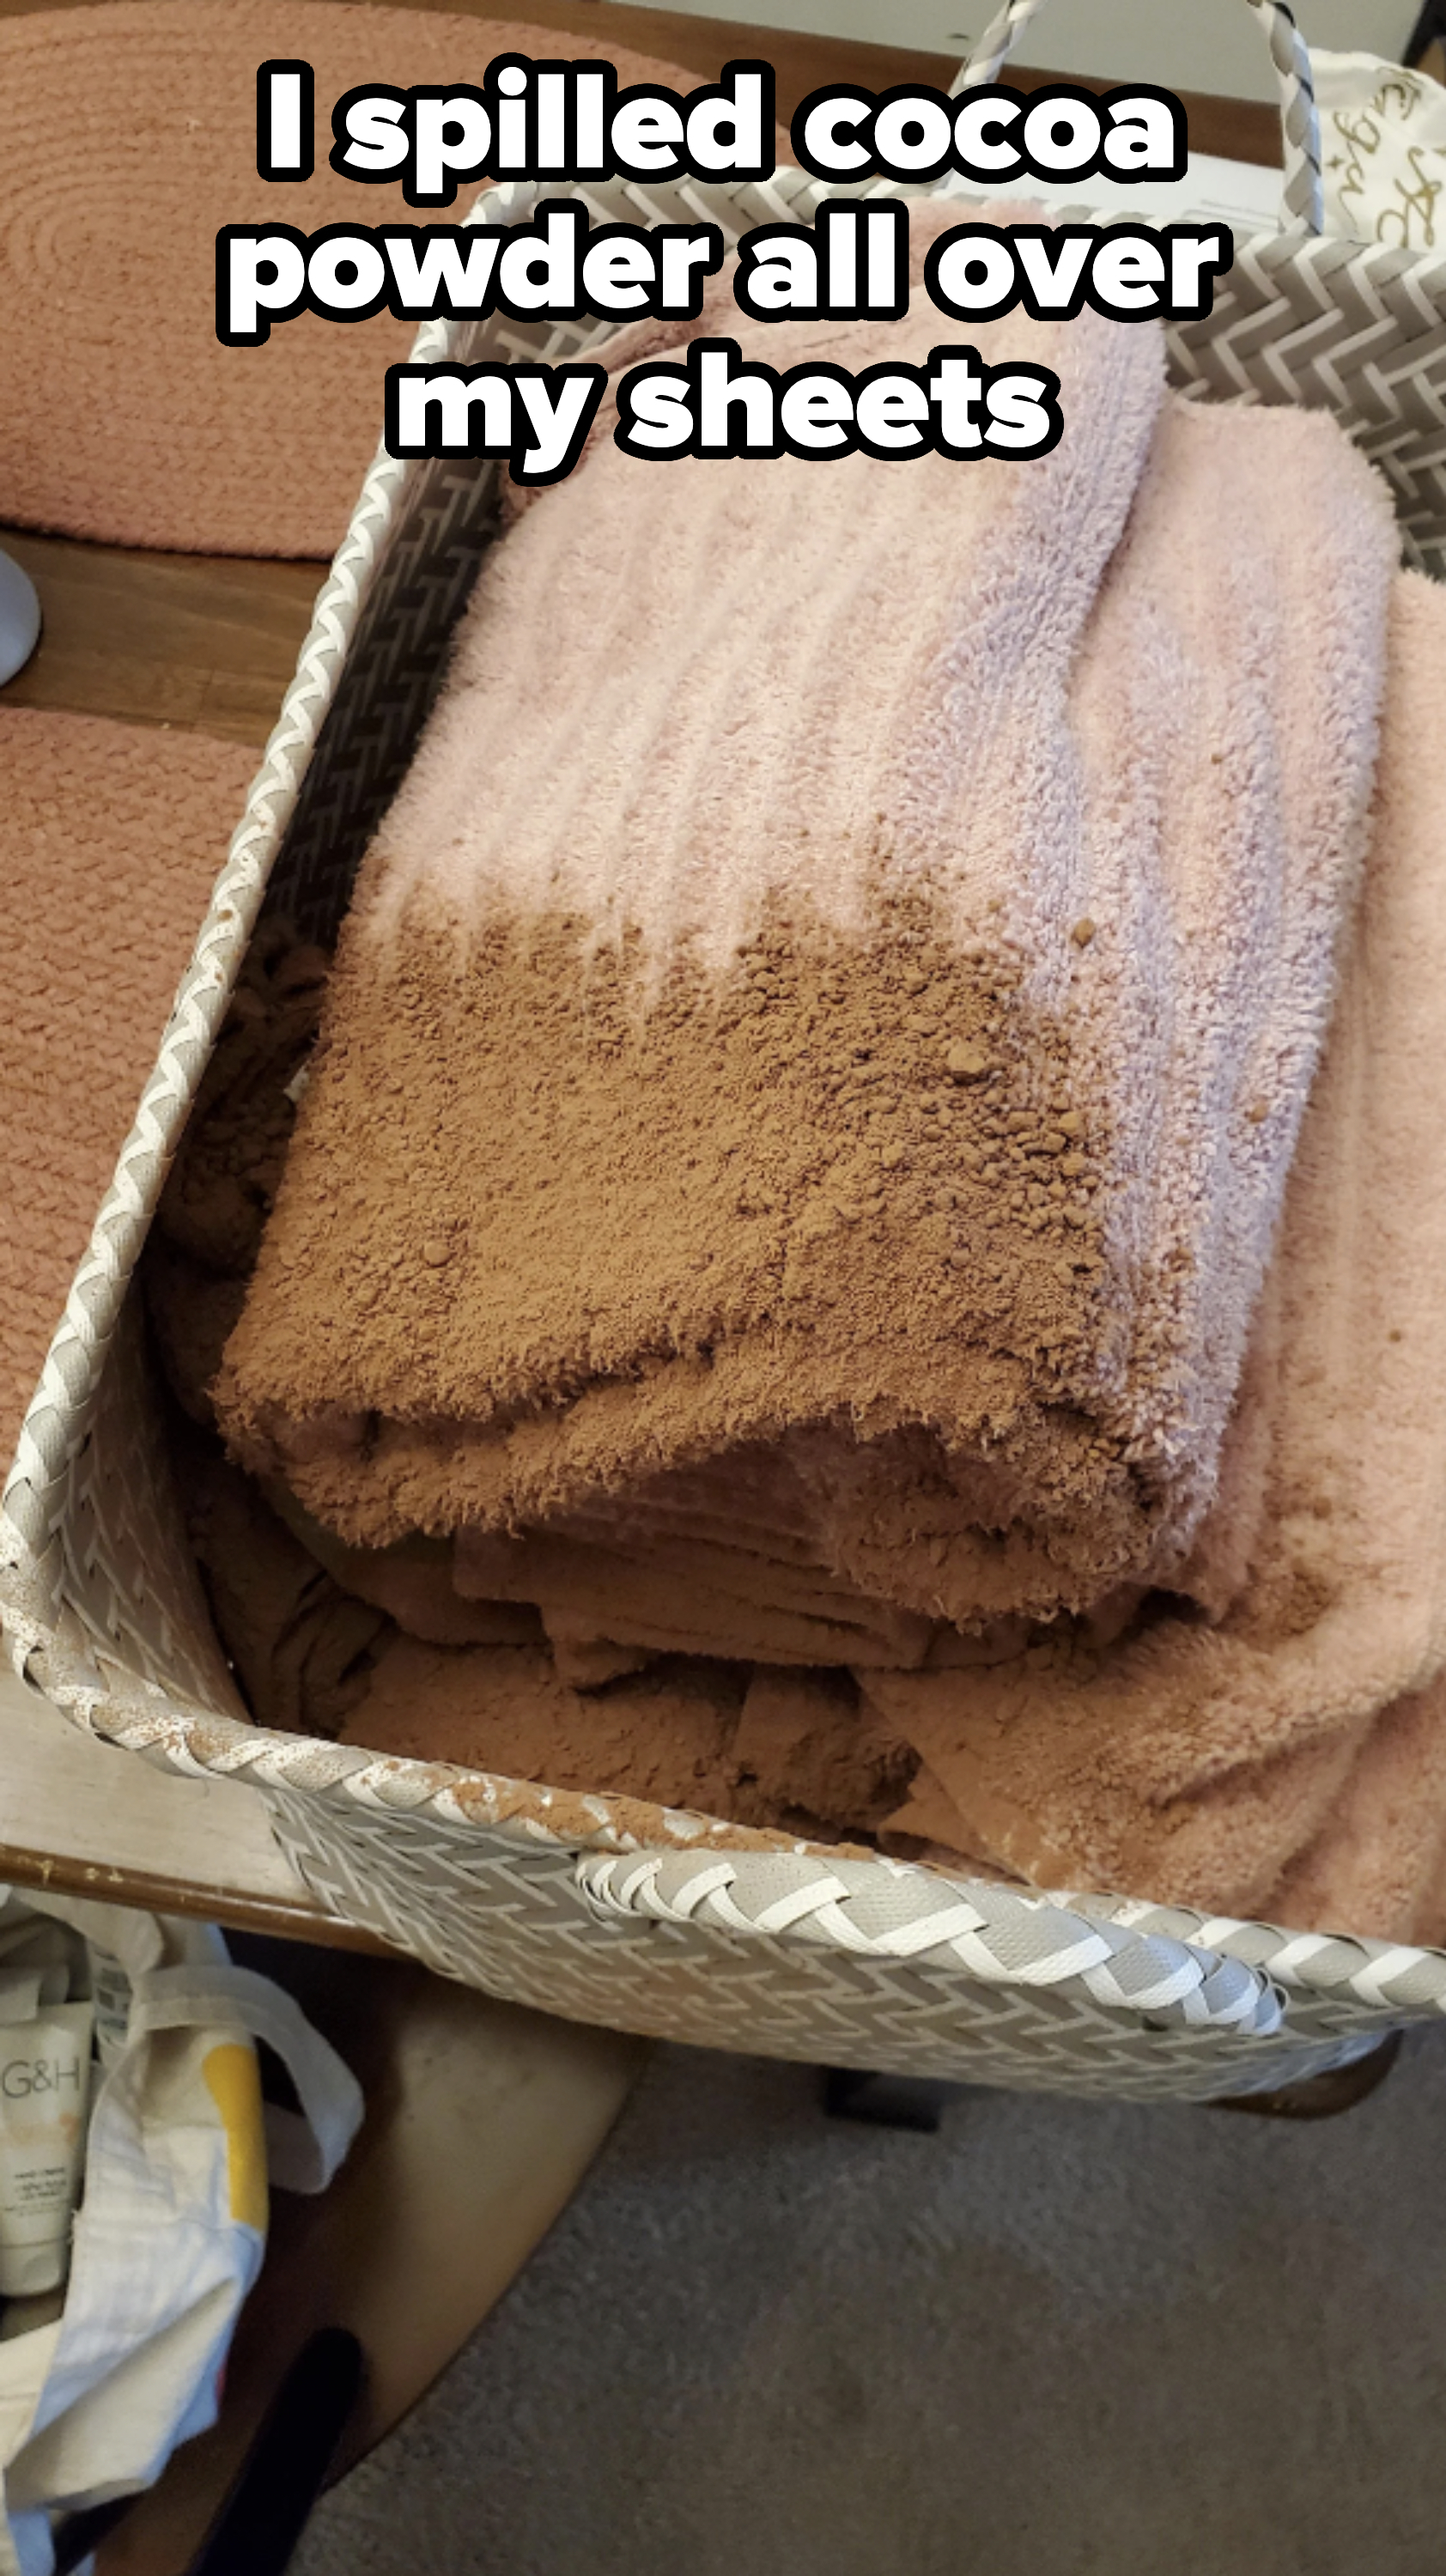 Sheets folded in a bin and covered in cocoa powder